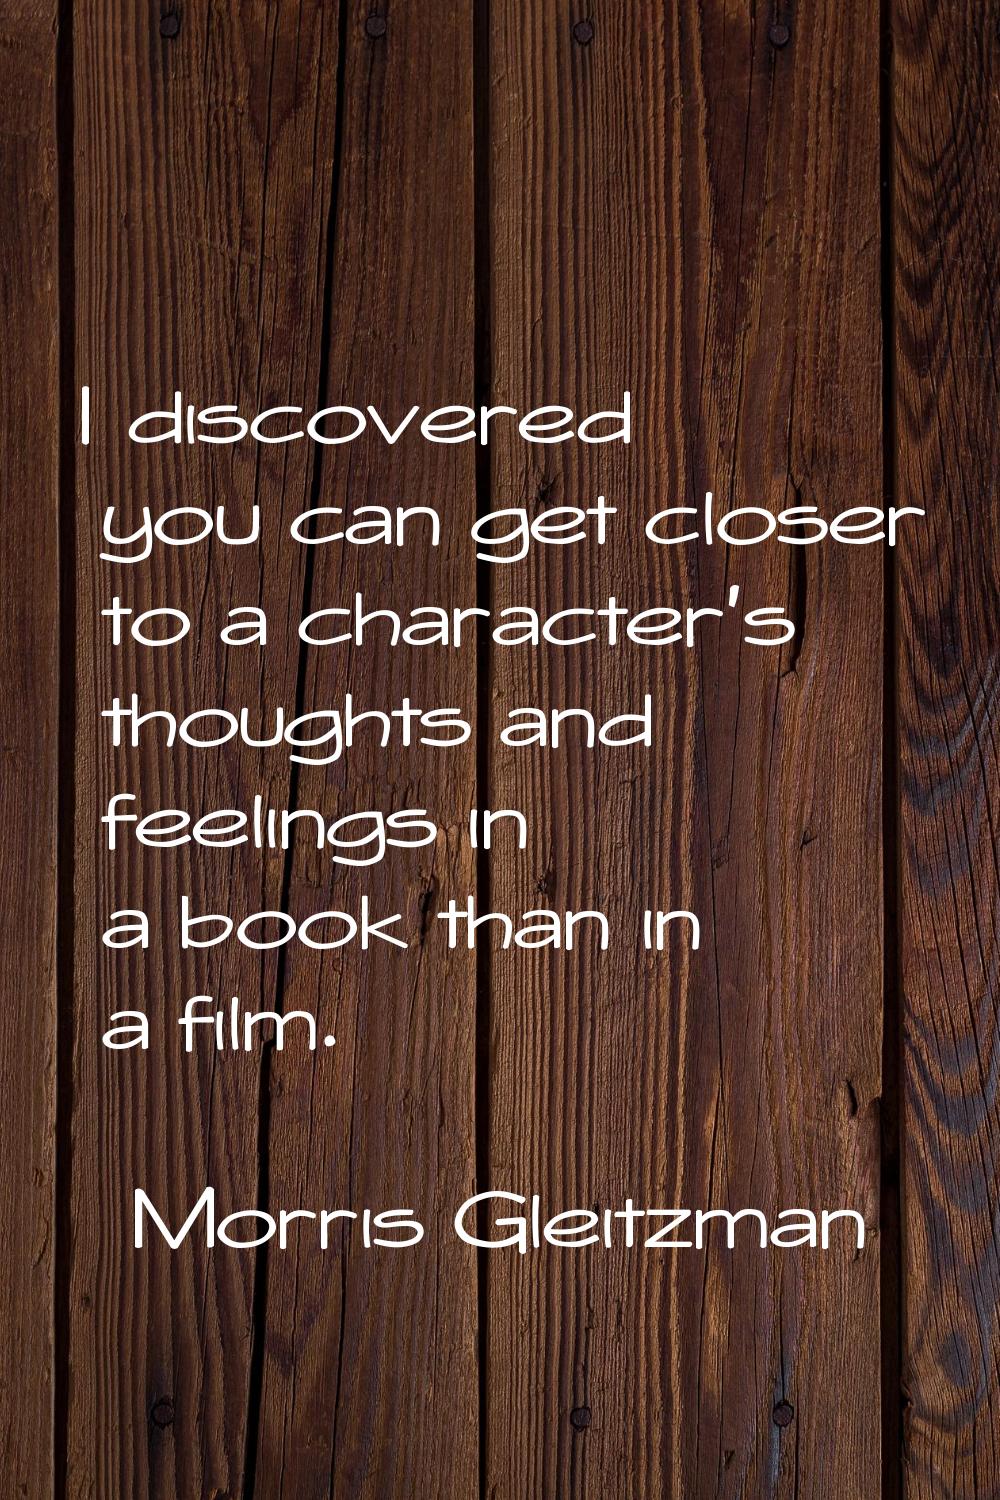 I discovered you can get closer to a character's thoughts and feelings in a book than in a film.